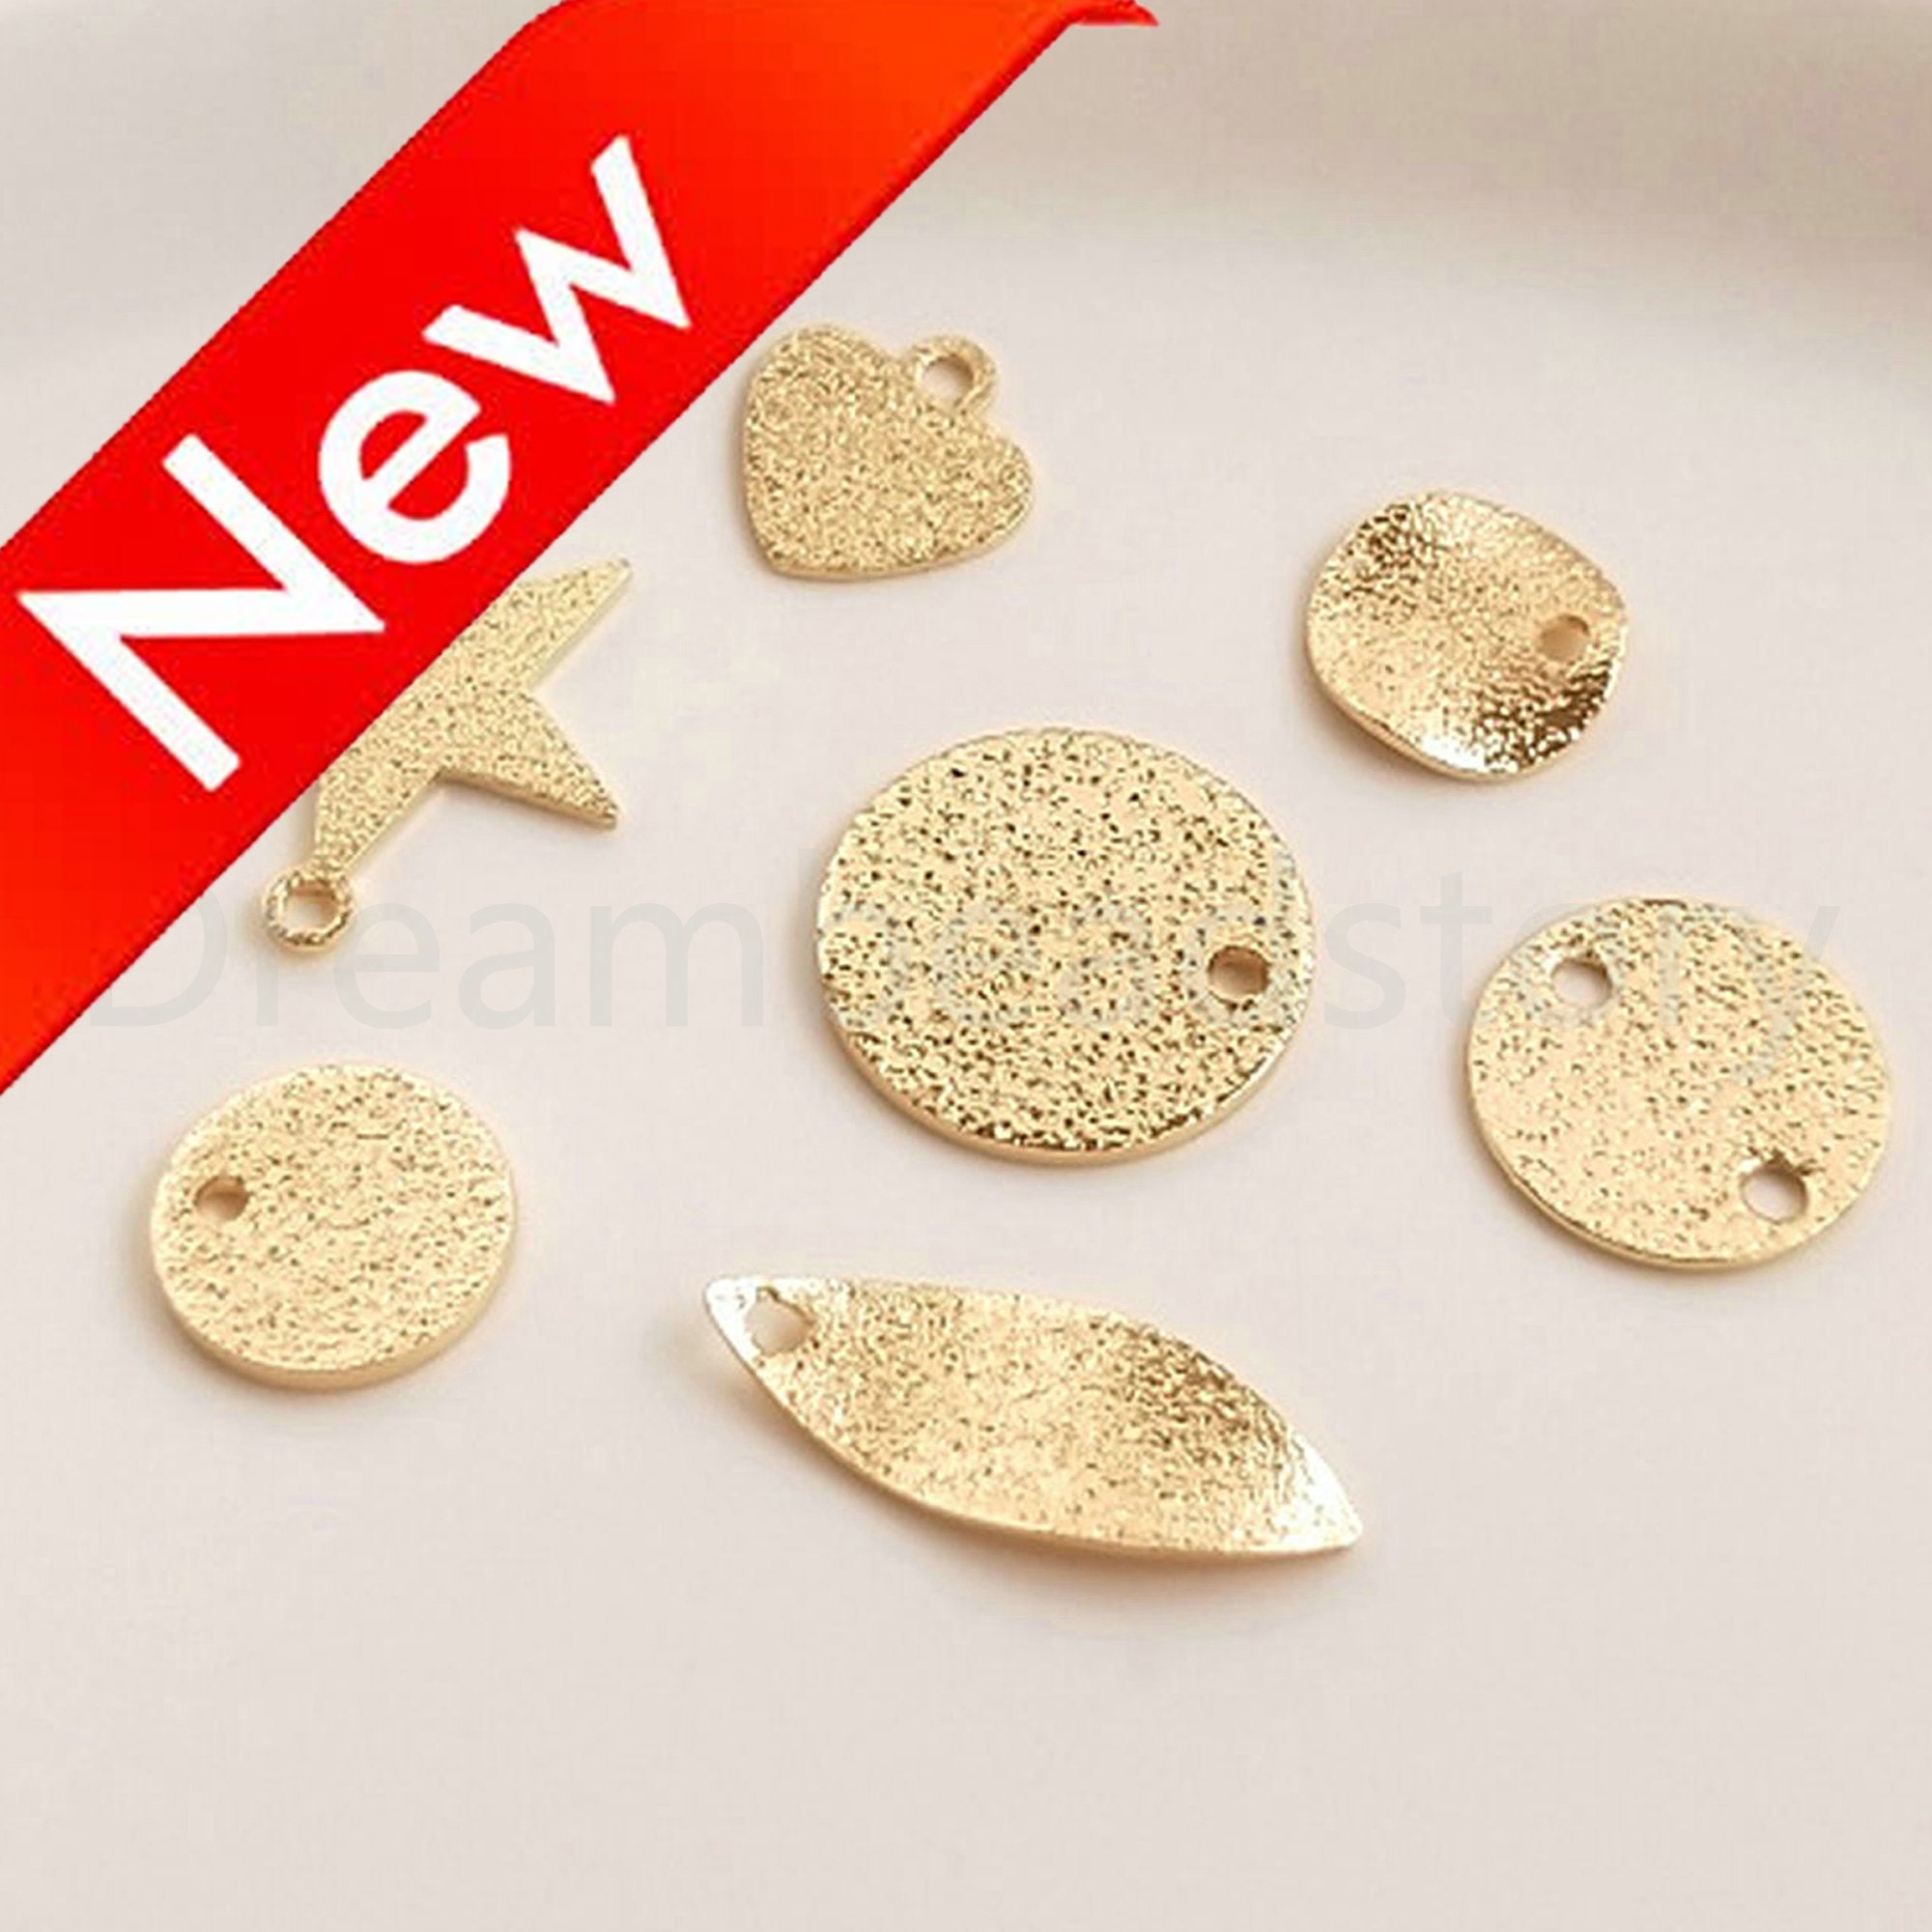 50pcs Gold Charms Assorted Charms Mixed Charms BULK Charms Charm Collection  Mixed Random Free Styles 